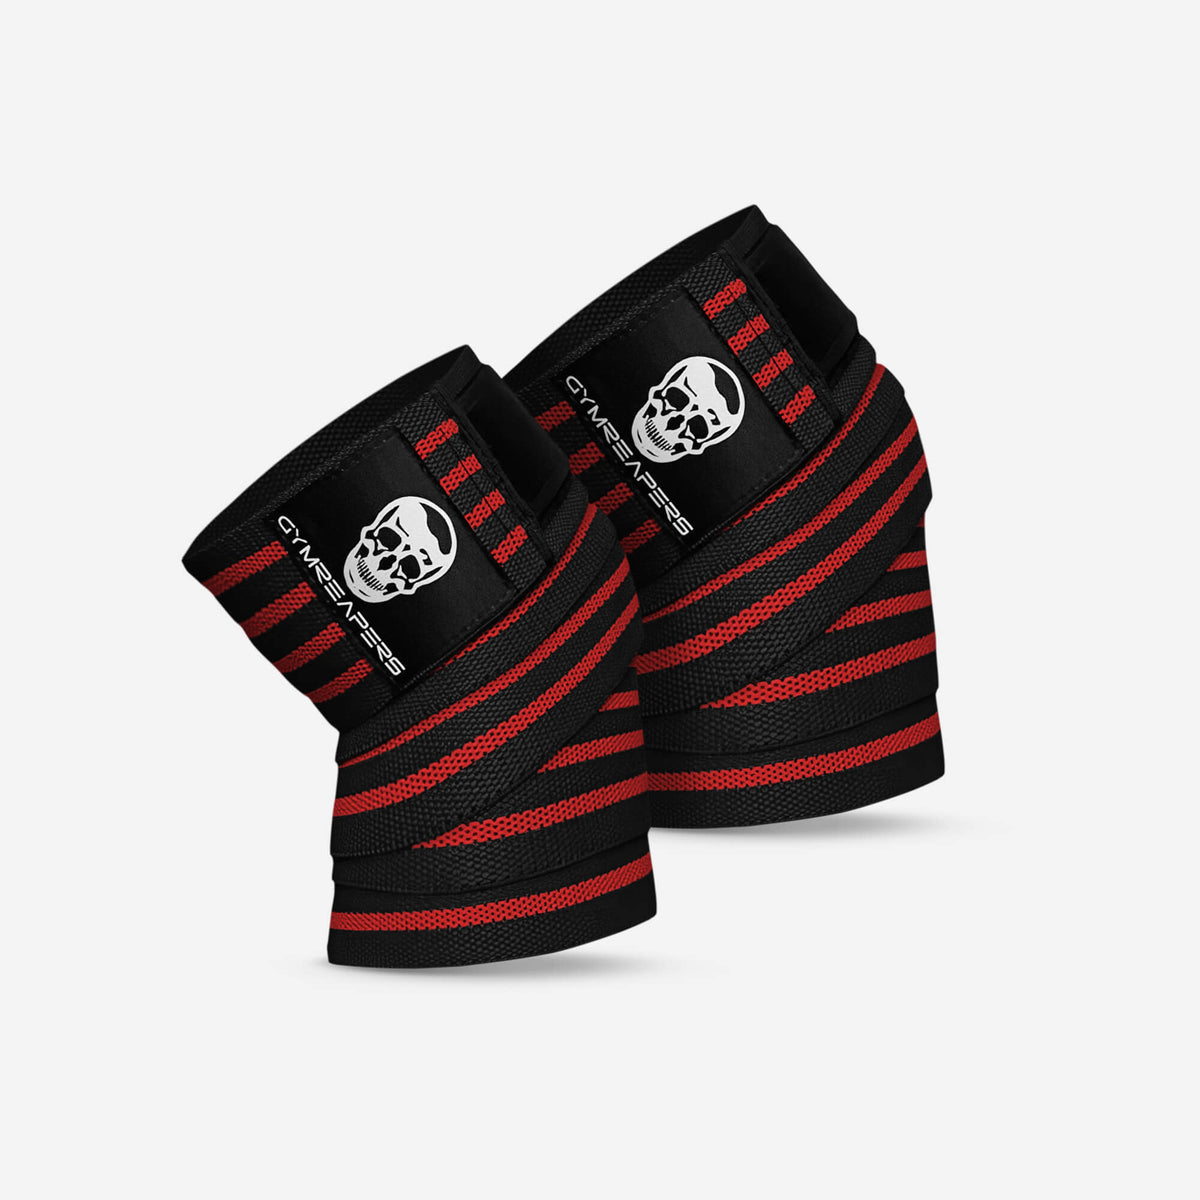 Gymreapers 72 Knee Wraps - Red